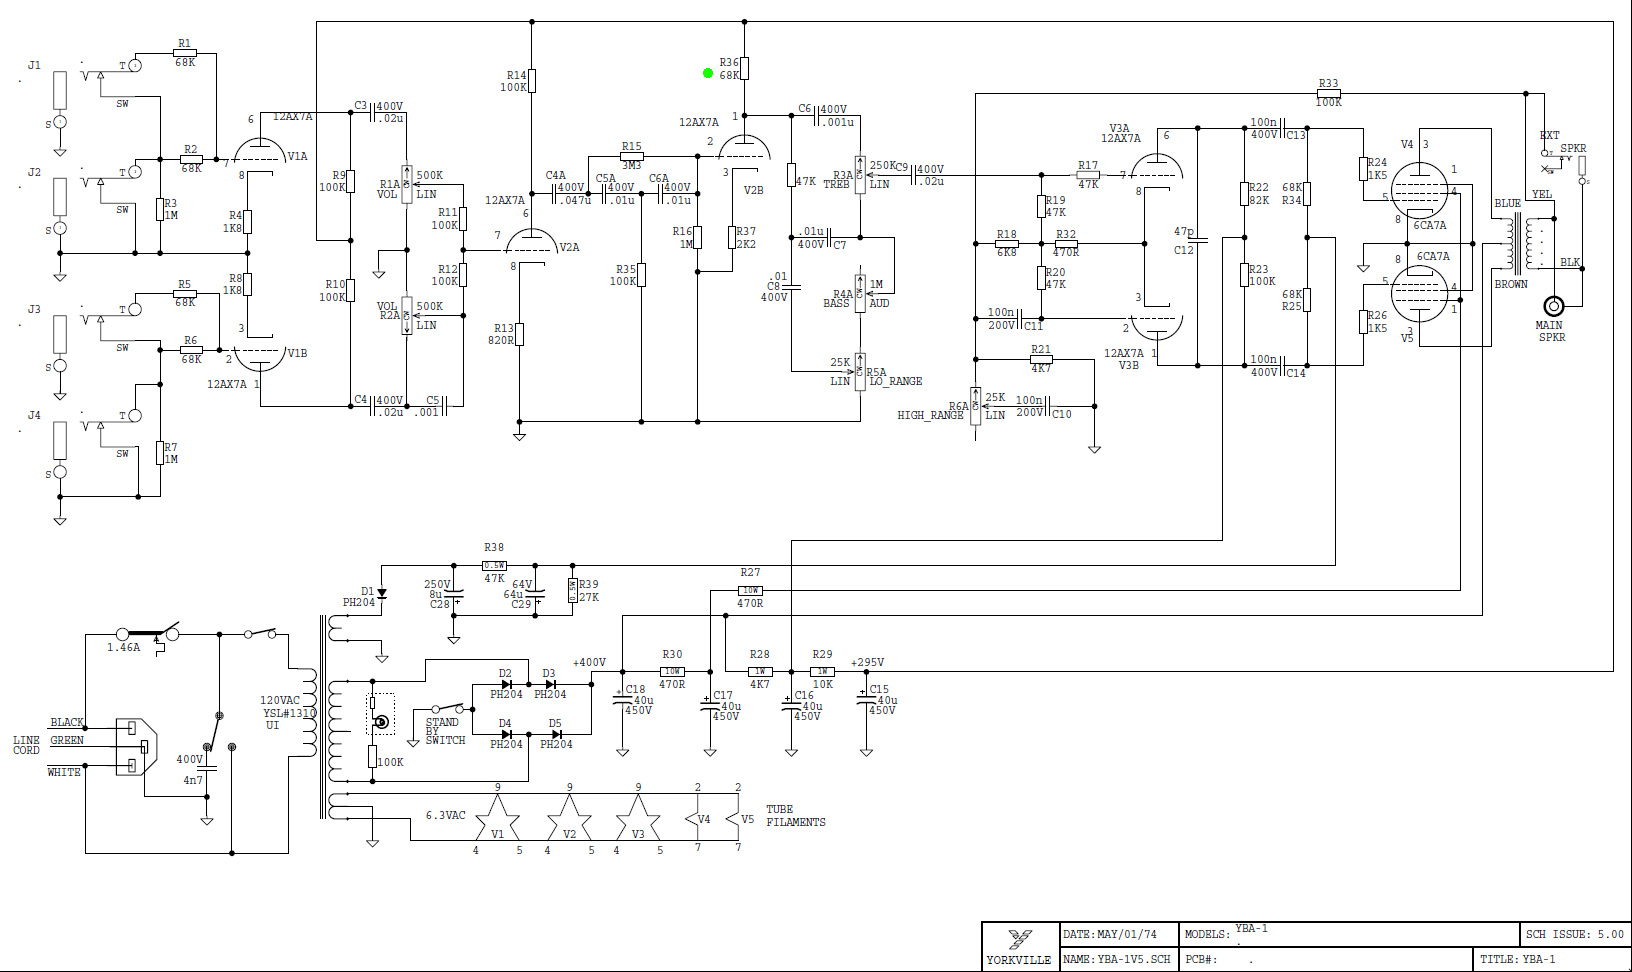 Yba C Switch Schematic As Well Traynor Lifier Schematic Archive Furthermore...